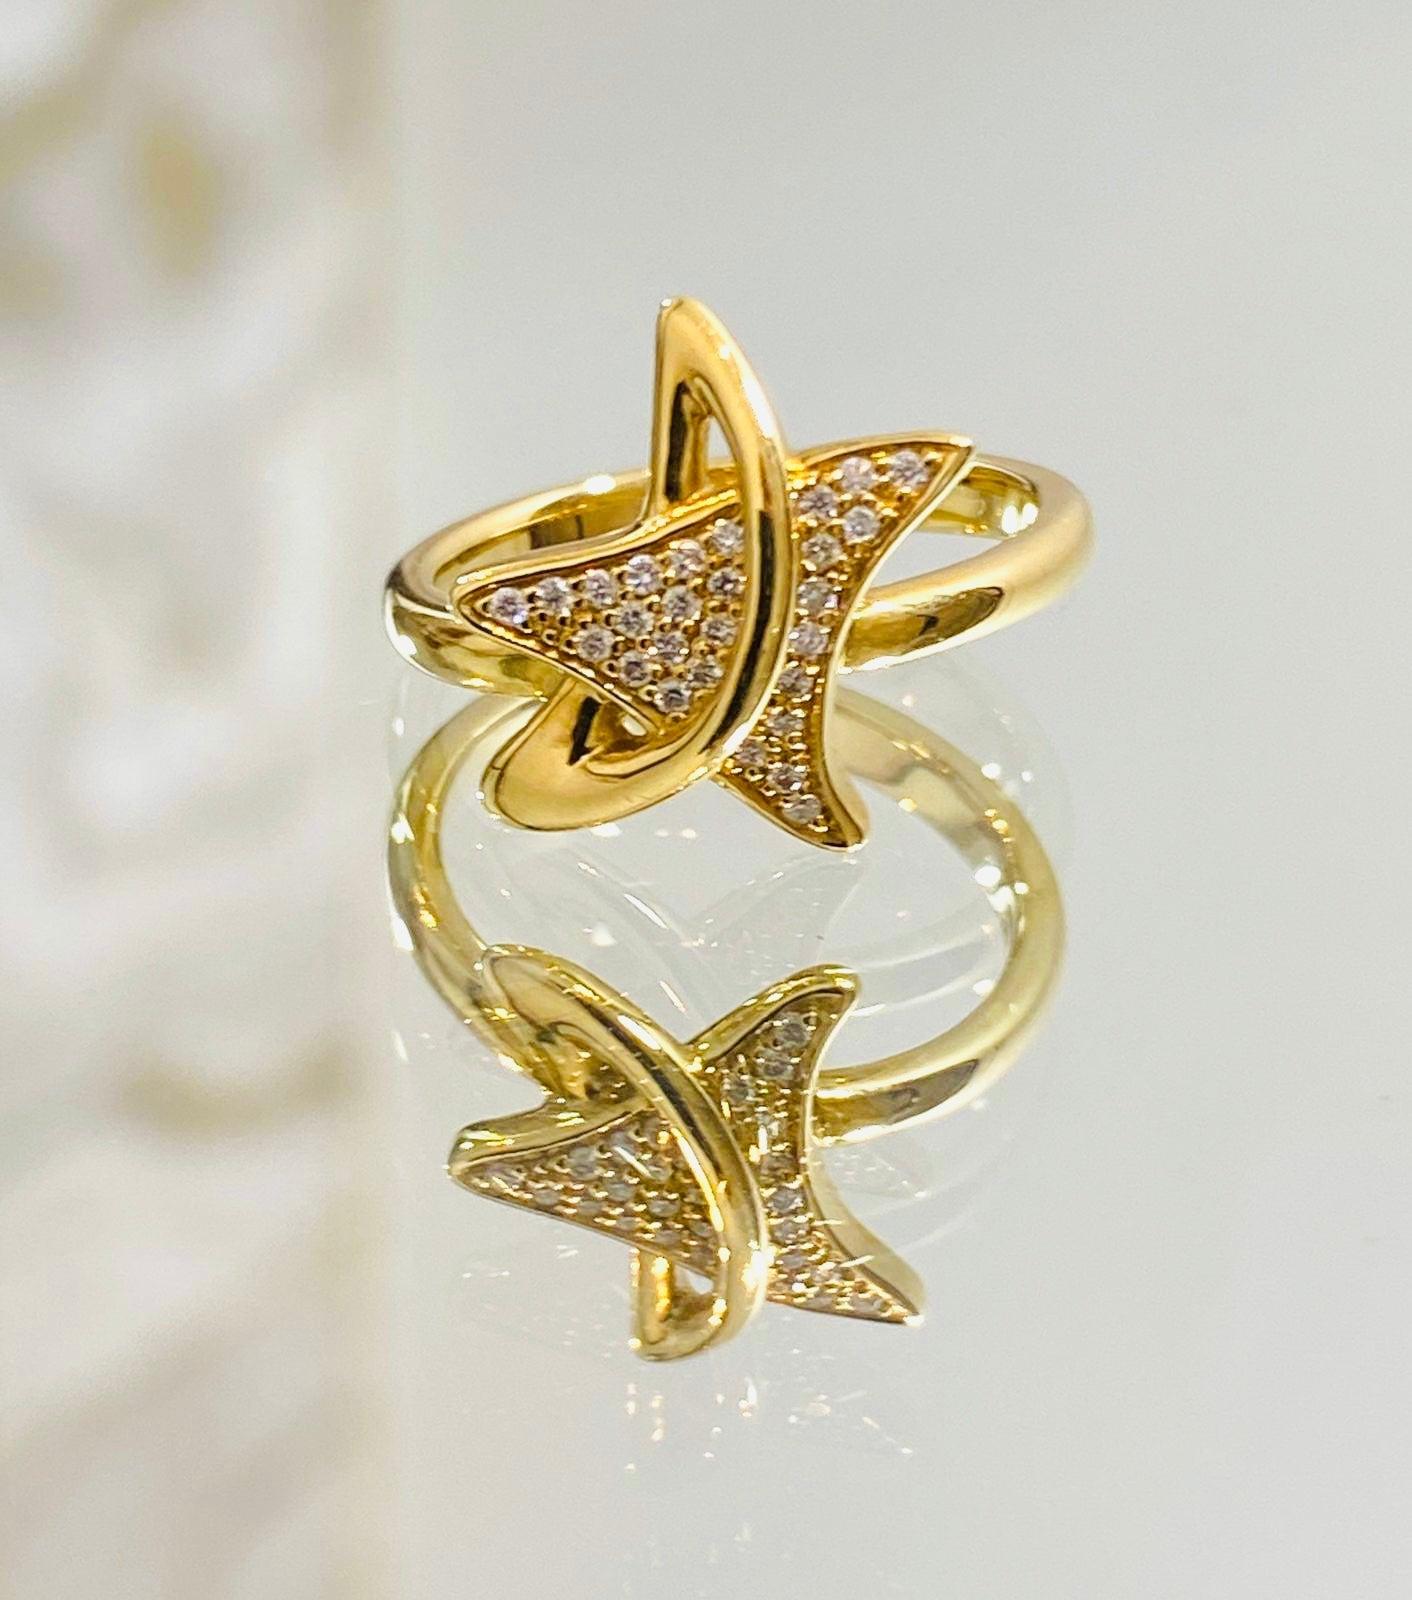 18k Gold & Diamond Star Ring.

Star design set with brilliant white diamonds. 18k yellow gold.

Additional information:
Size – 52EU
Condition - Very Good (Light scratches)
Composition - Diamond, 18k Gold
Comes With - A Box